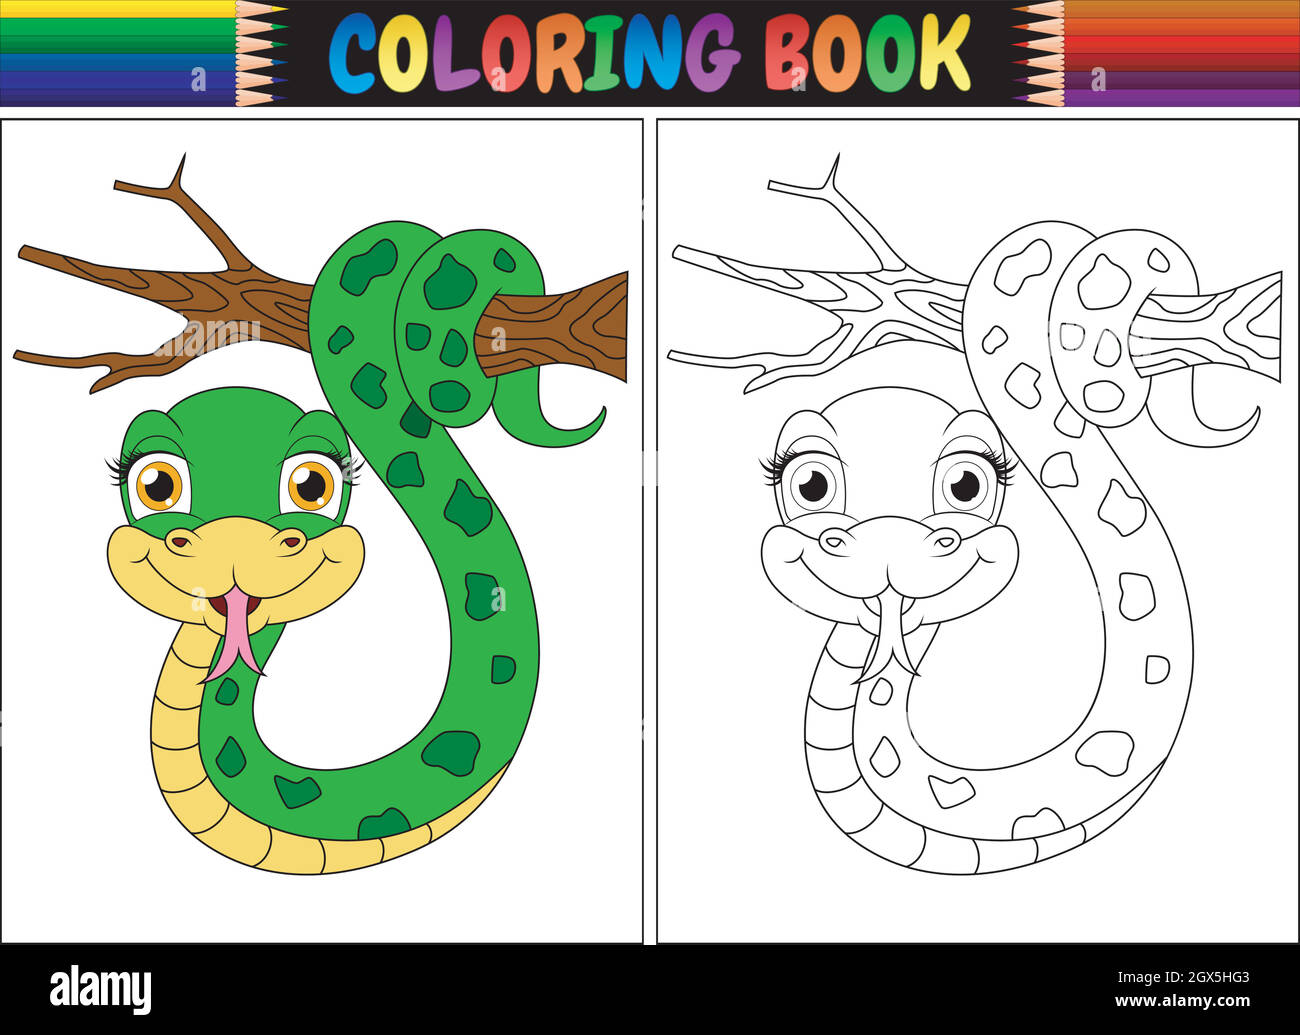 Coloring book with cute snake on tree branch stock vector image art